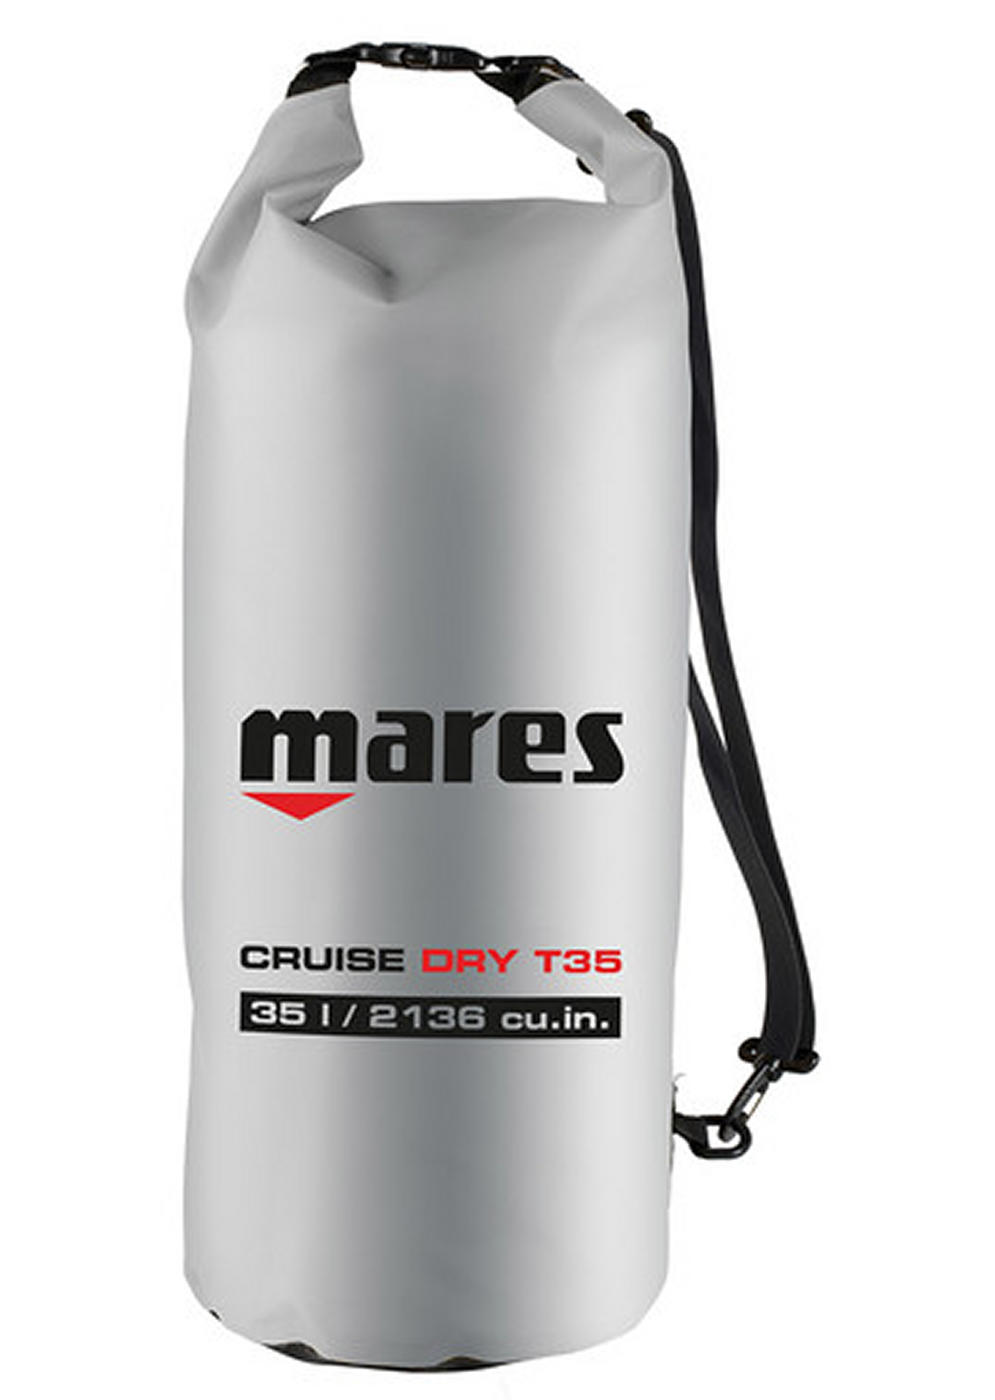 Mares Cruise Dry T35 Bag